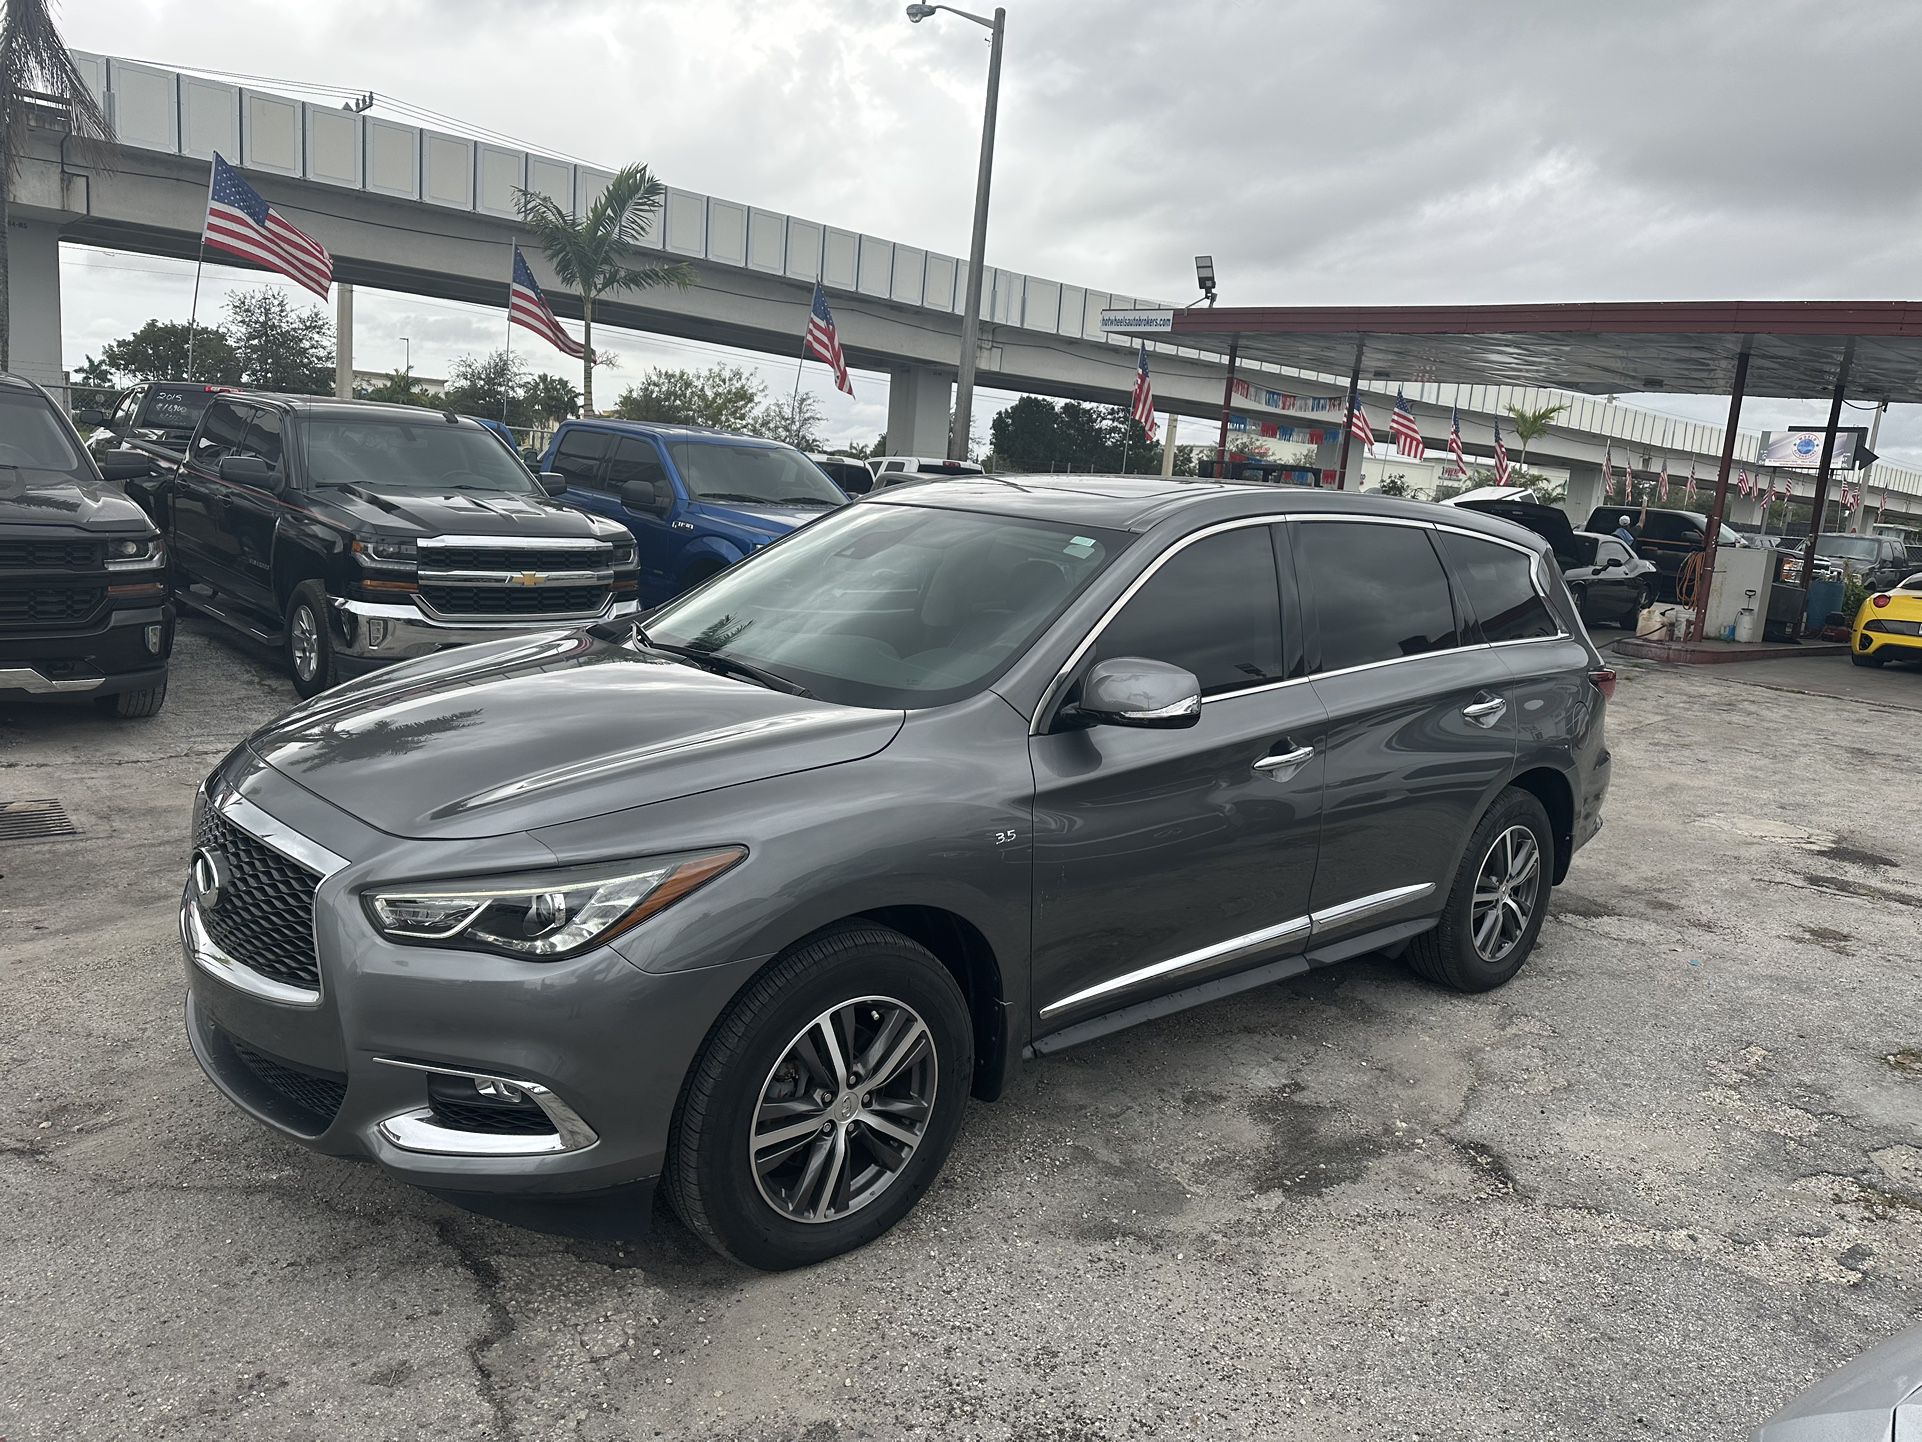 used 2019 infiniti qx60 - front view 1